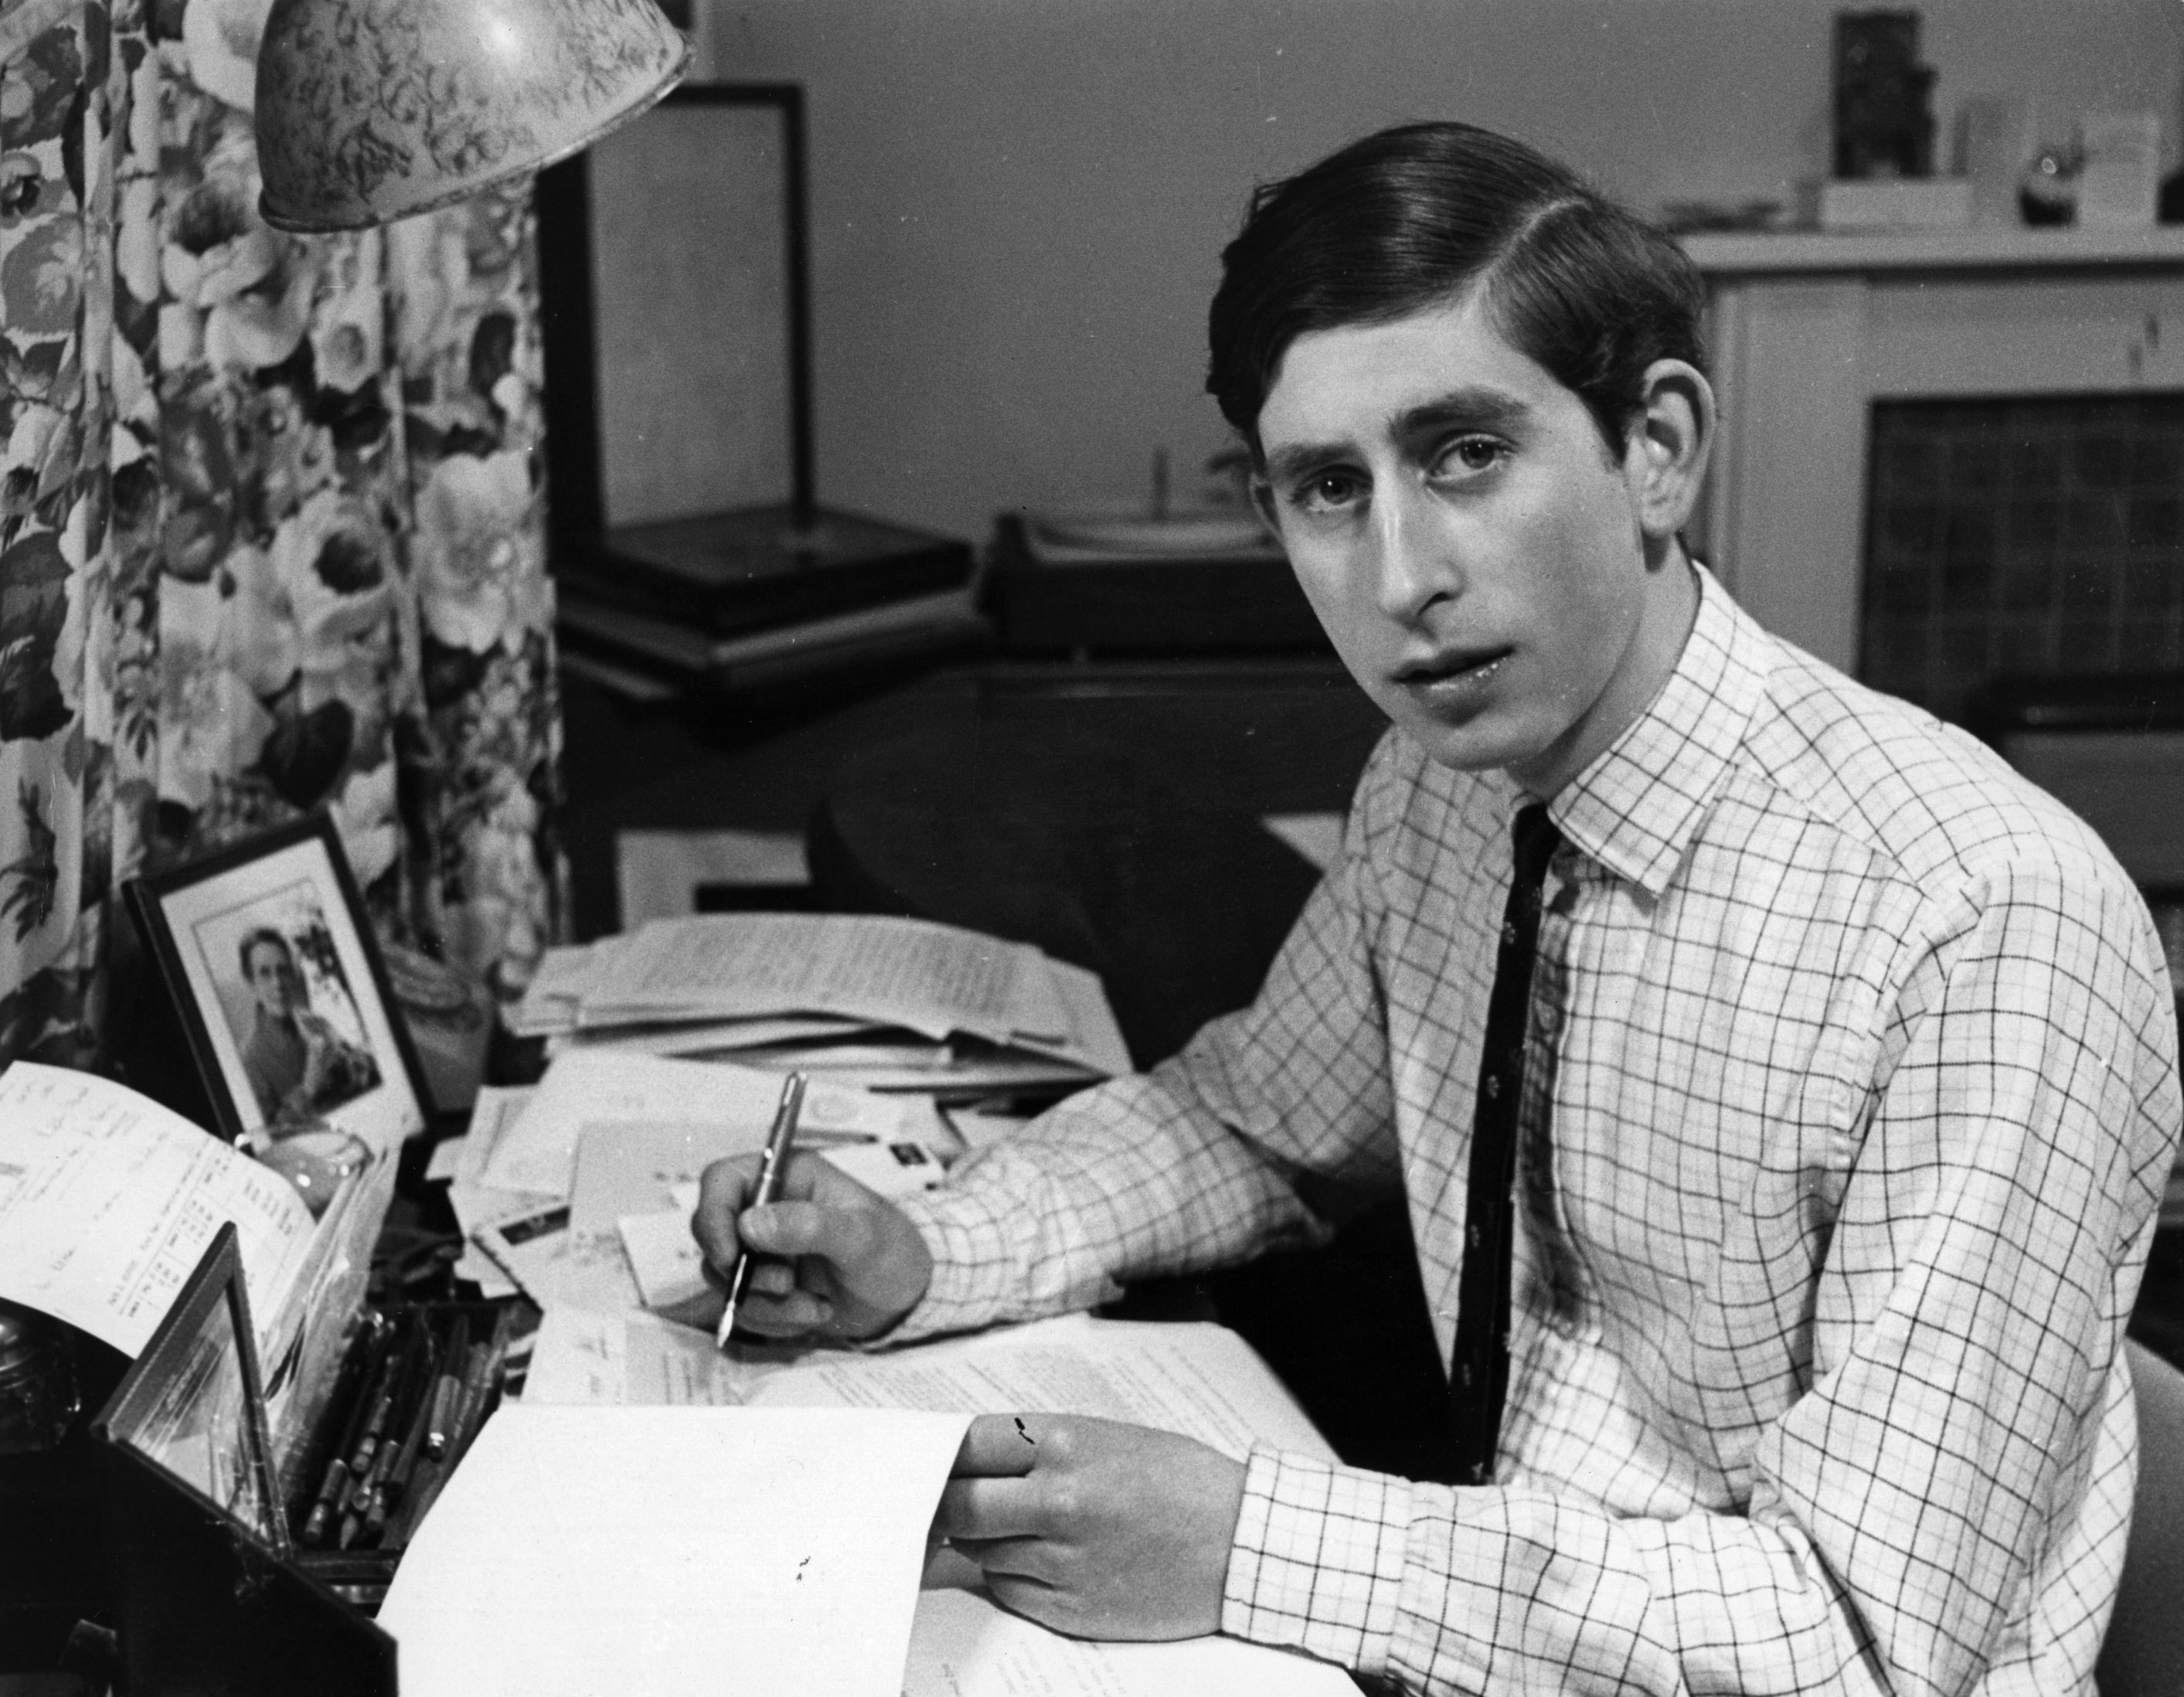 Prince Charles, the Prince of Wales, seen here in his room at Trinity College when he was an undergraduate in 1969 | Source: Getty Images